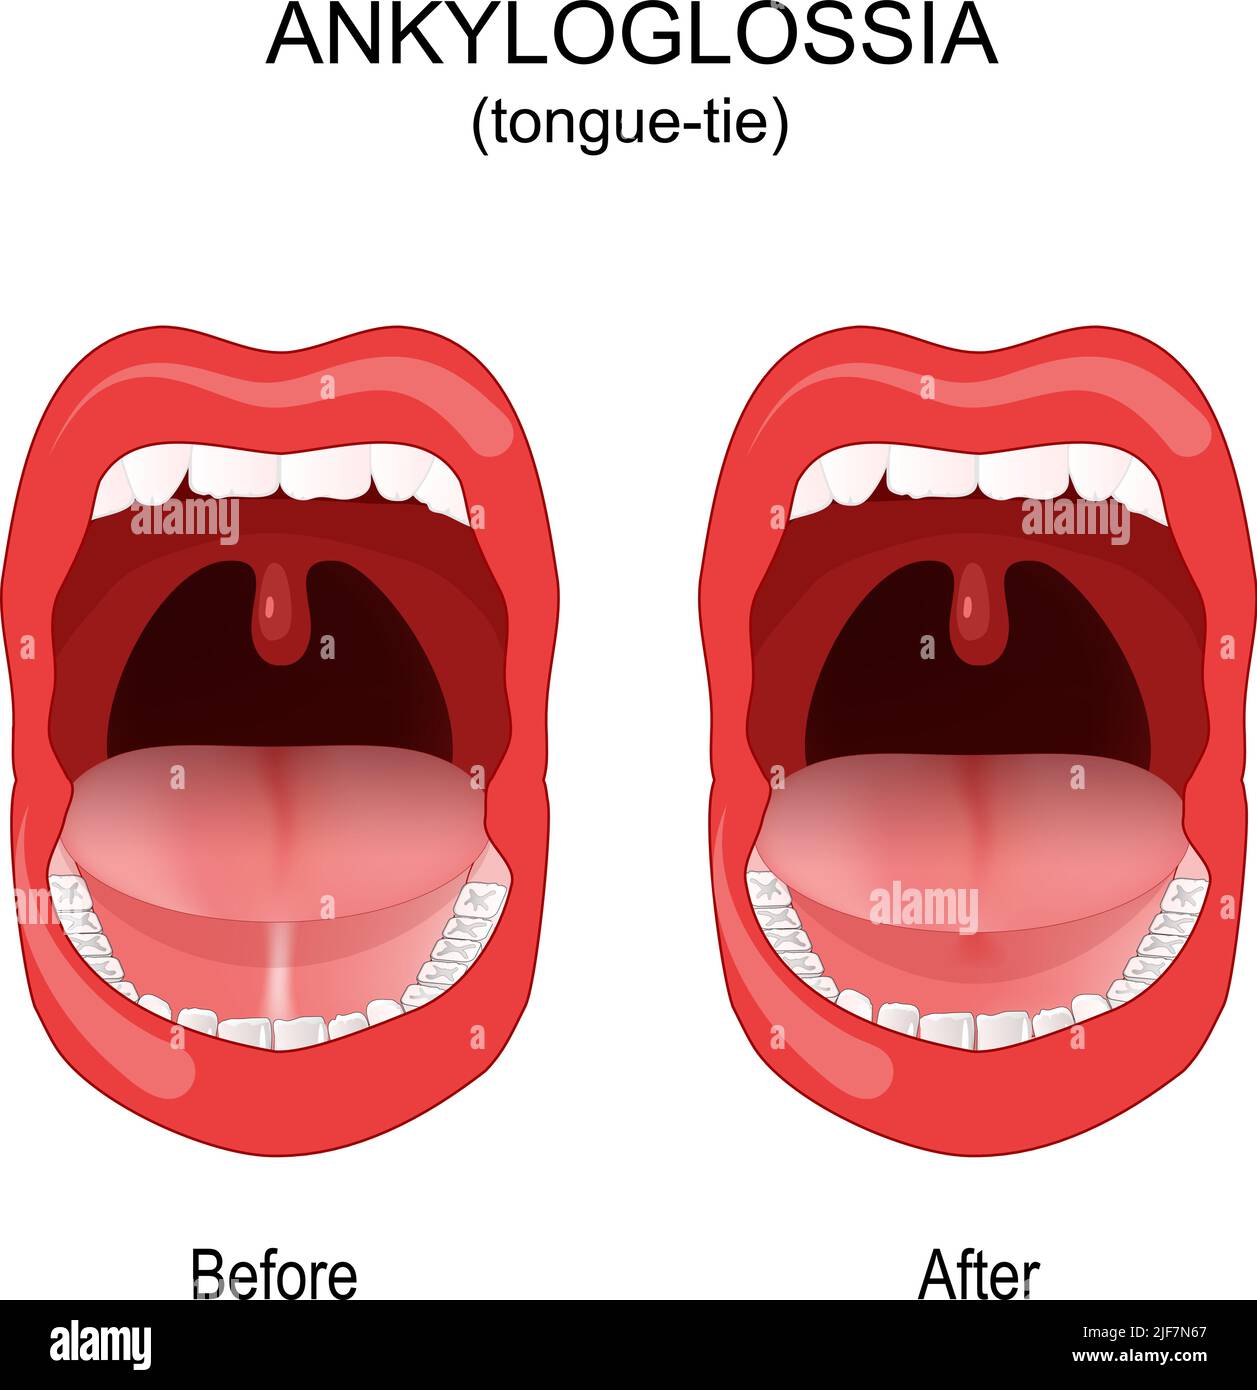 Ankyloglossia. tongue-tie. congenital oral anomaly. short, thick lingual frenulum that connecting the underside of the tongue to the floor of the mout Stock Vector